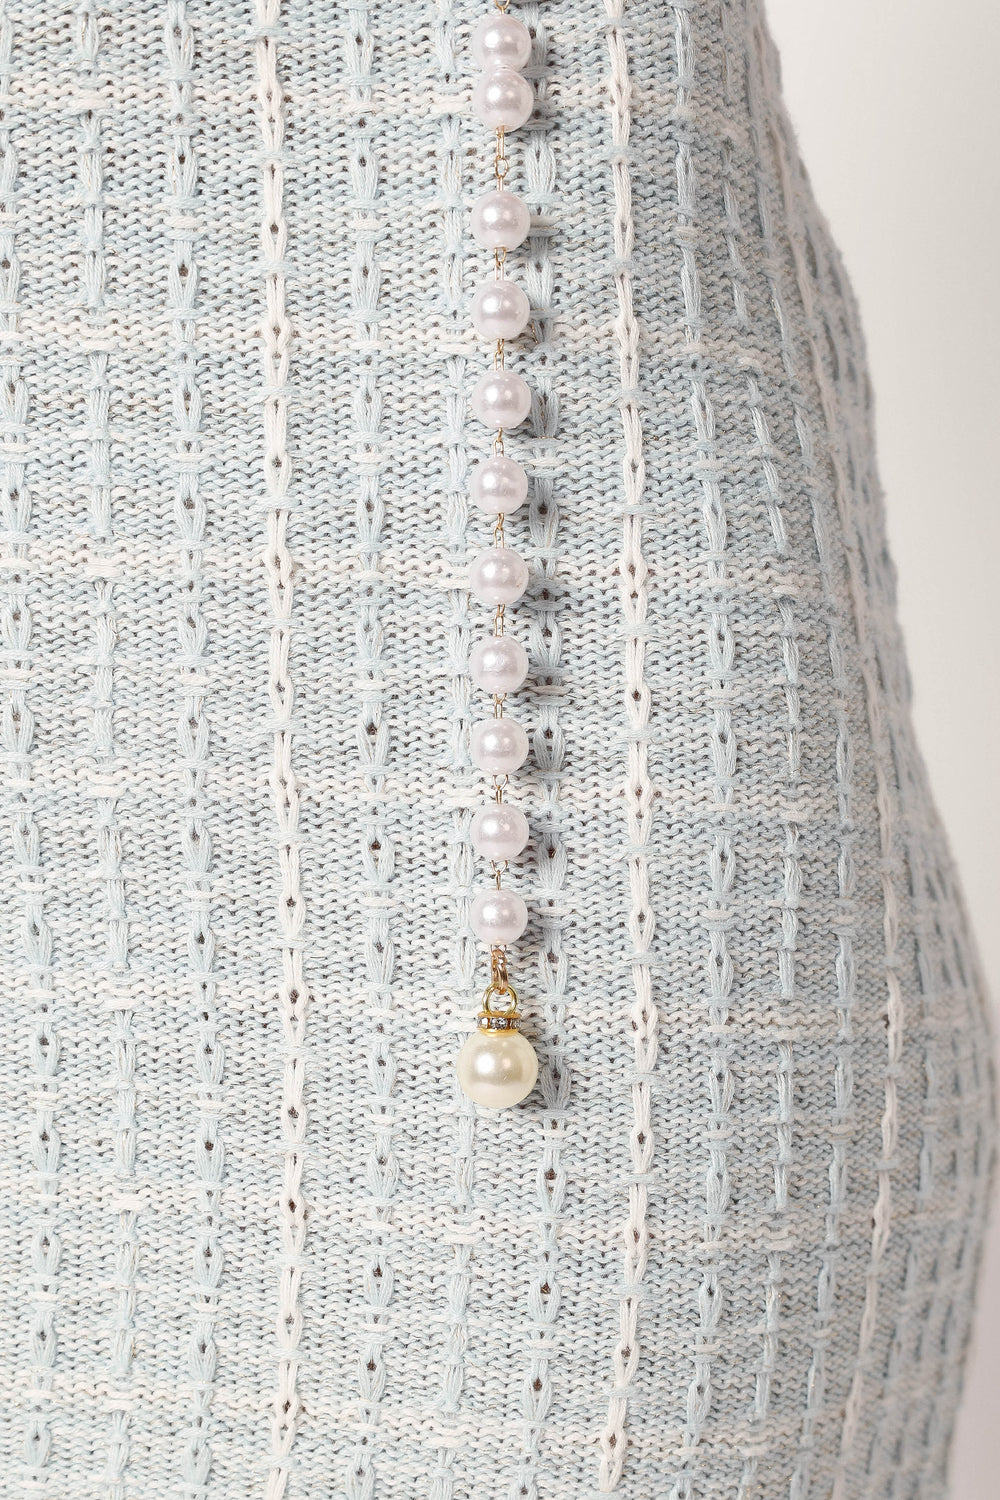 Petal and Pup USA ACCESSORIES Sophia Pearl Chain Belt - Pearl One Size